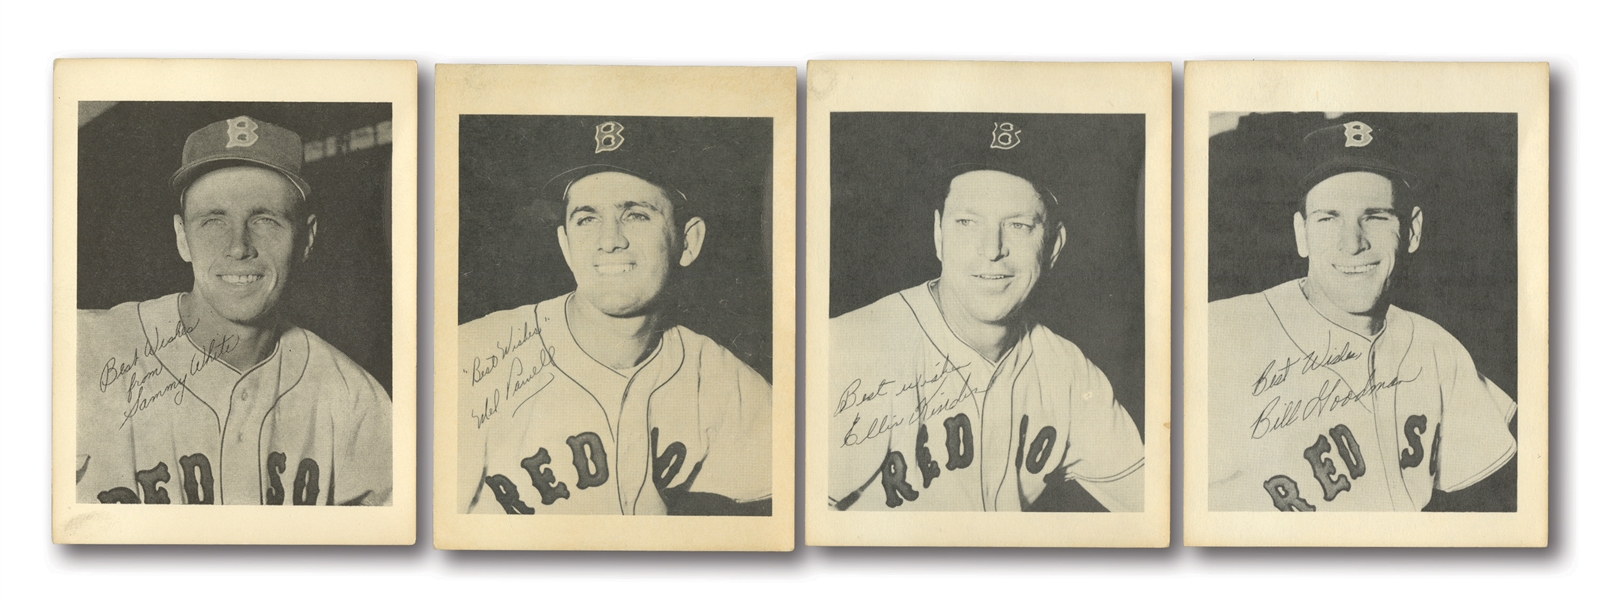 1953 FIRST NATIONAL SUPER MARKET BOSTON RED SOX COMPLETE SET OF (4) WITH GOODMAN, WHITE, PARNELL & KINDER